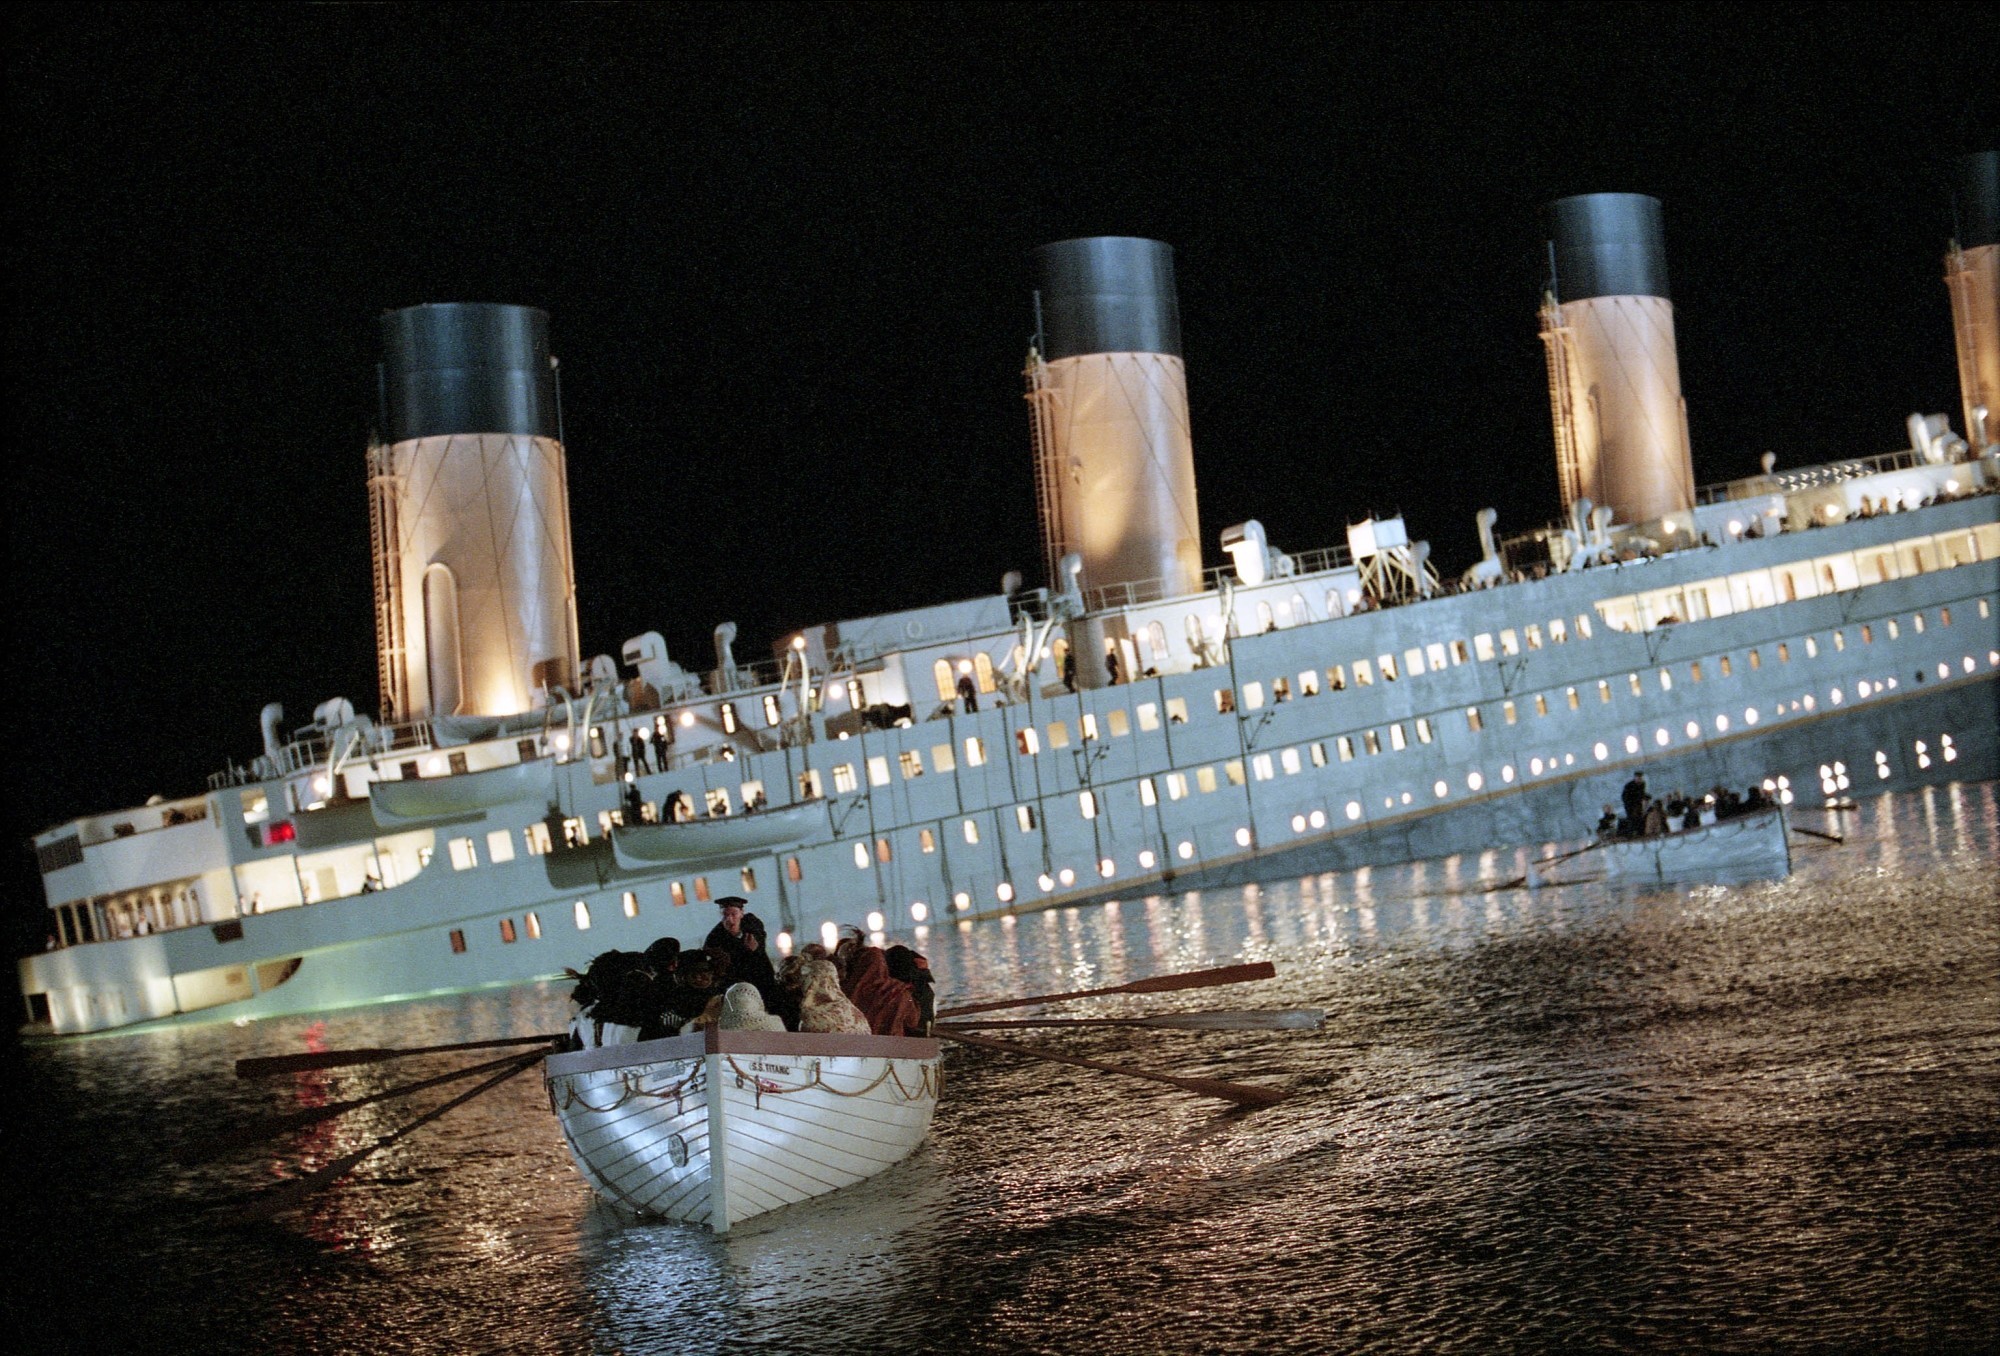 Titanic was the most successful in terms of takings at the box office – until beaten by Cameron’s Avatar in 2009 (20 CENTURY FOX/ Sportsphoto Ltd./ Allstar)